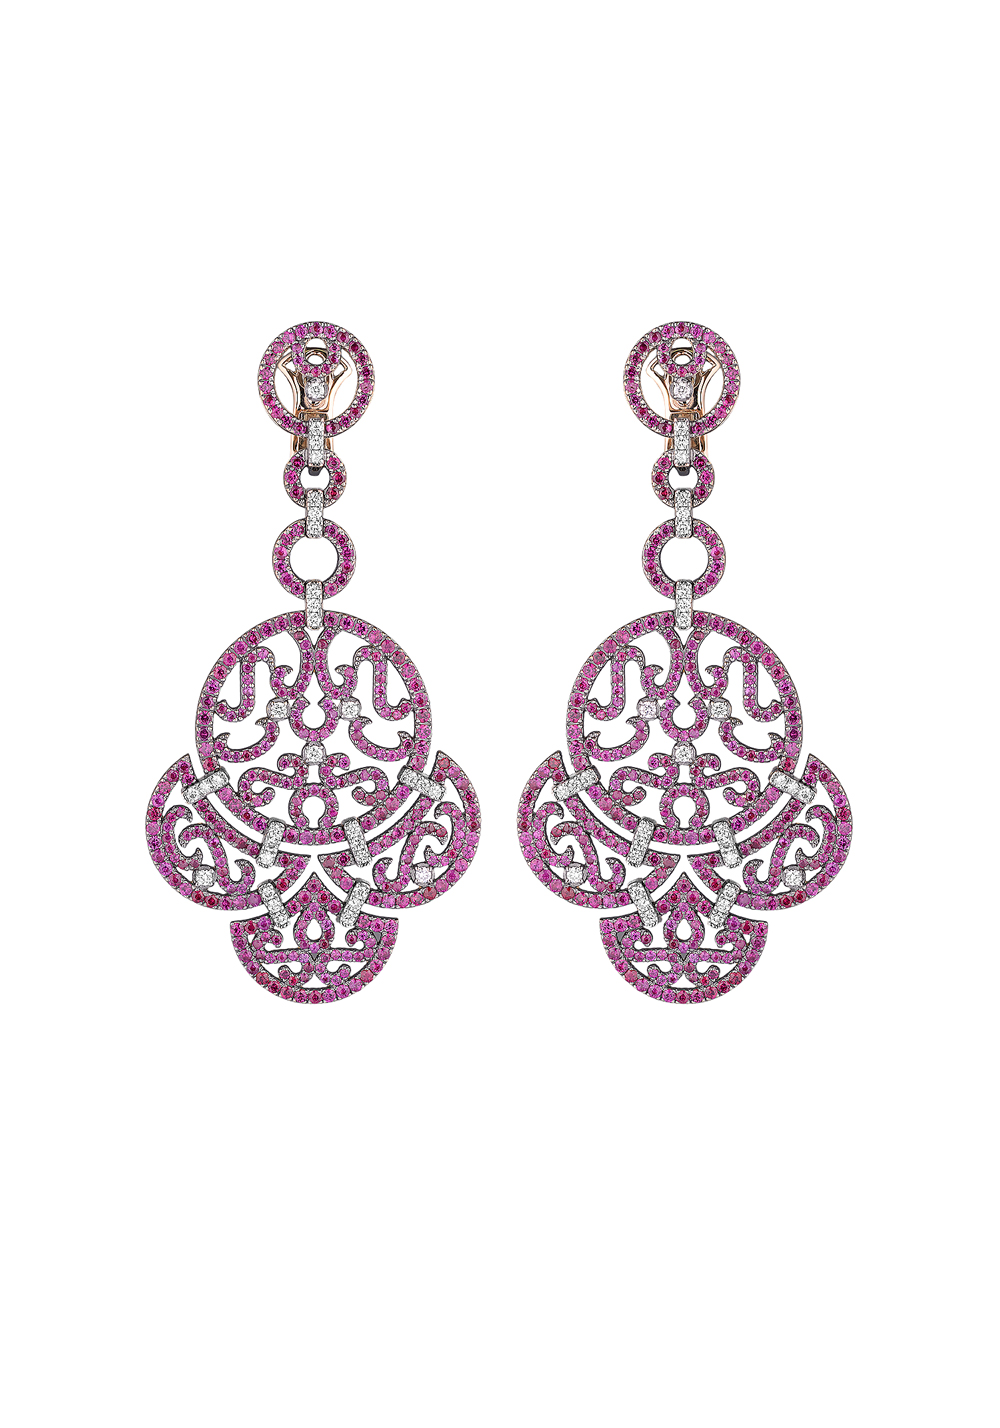 Jacob & Co. Серьги Lace Collection Ruby Earrings 20170002515